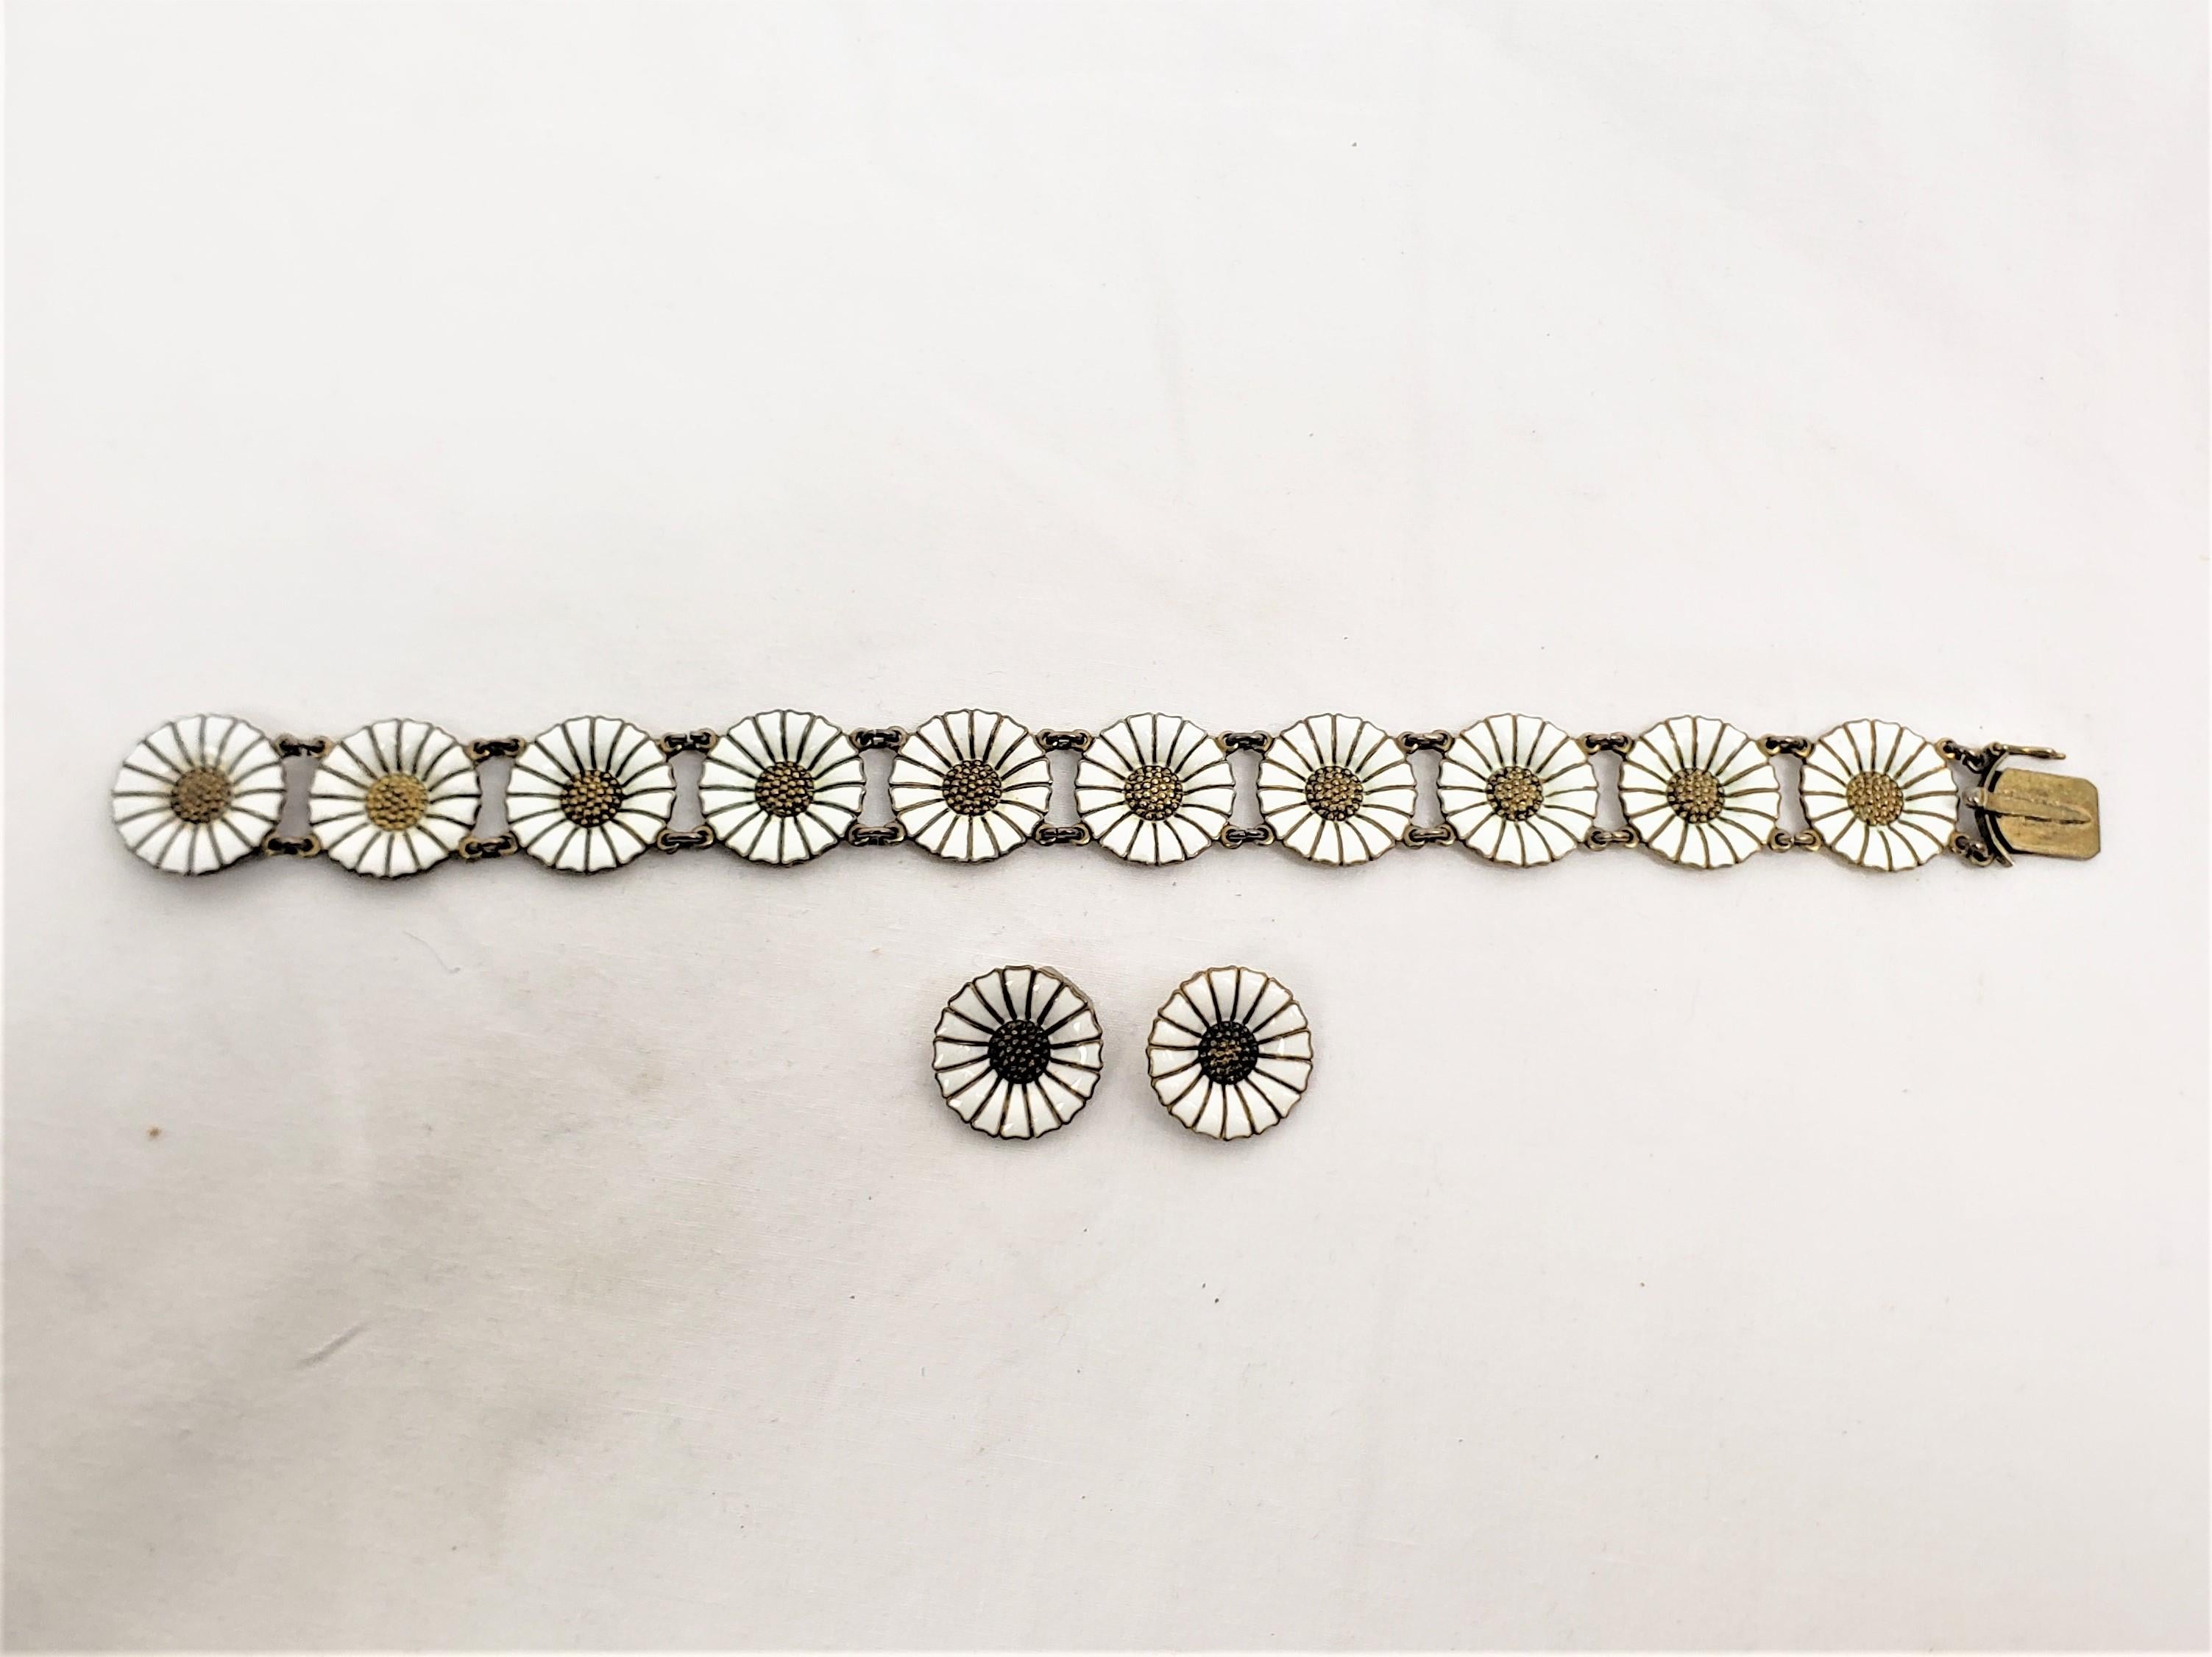 This bracelet and earring set was made by the well known Anton Michelsen of Denmark in approximately 1960 and done in the period Mid-Century Modern style. The bracelet and earrings are composed of sterling silver and shaped as stylized daisys with